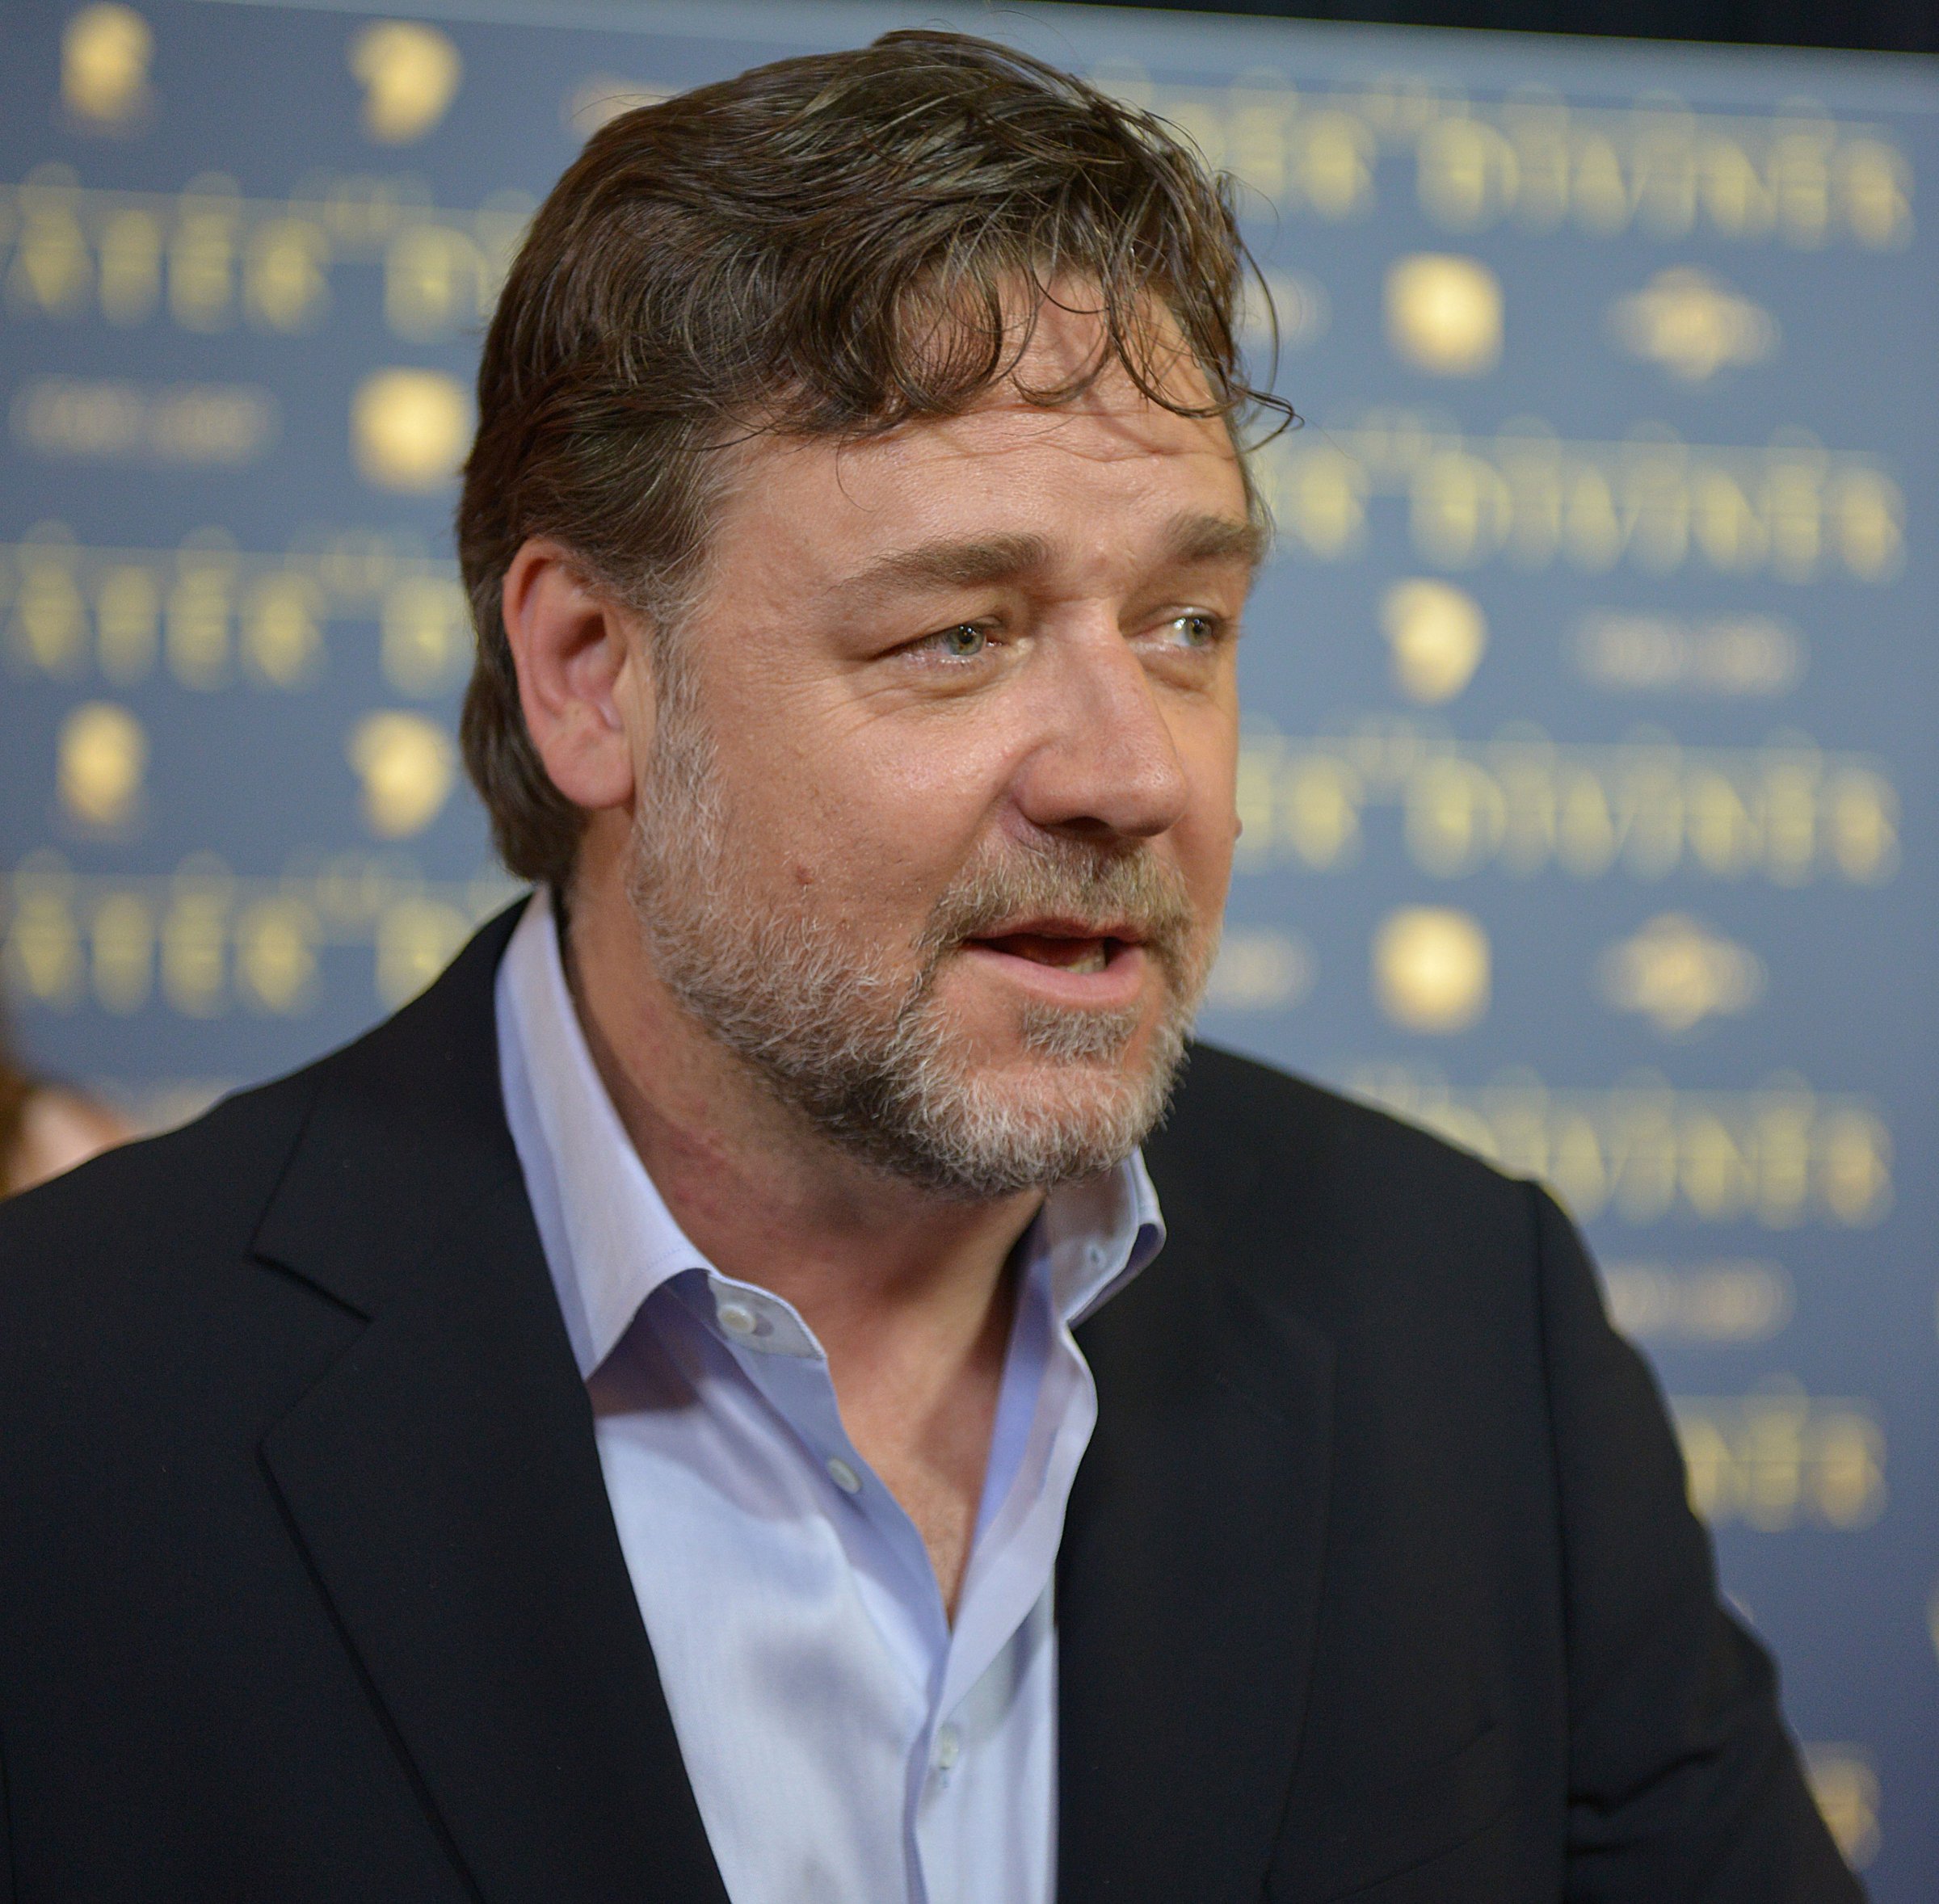 Russell Crowe arrives for the premiere of 'The Water Diviner' in Melbourne, Australia on Dec. 3, 2014.